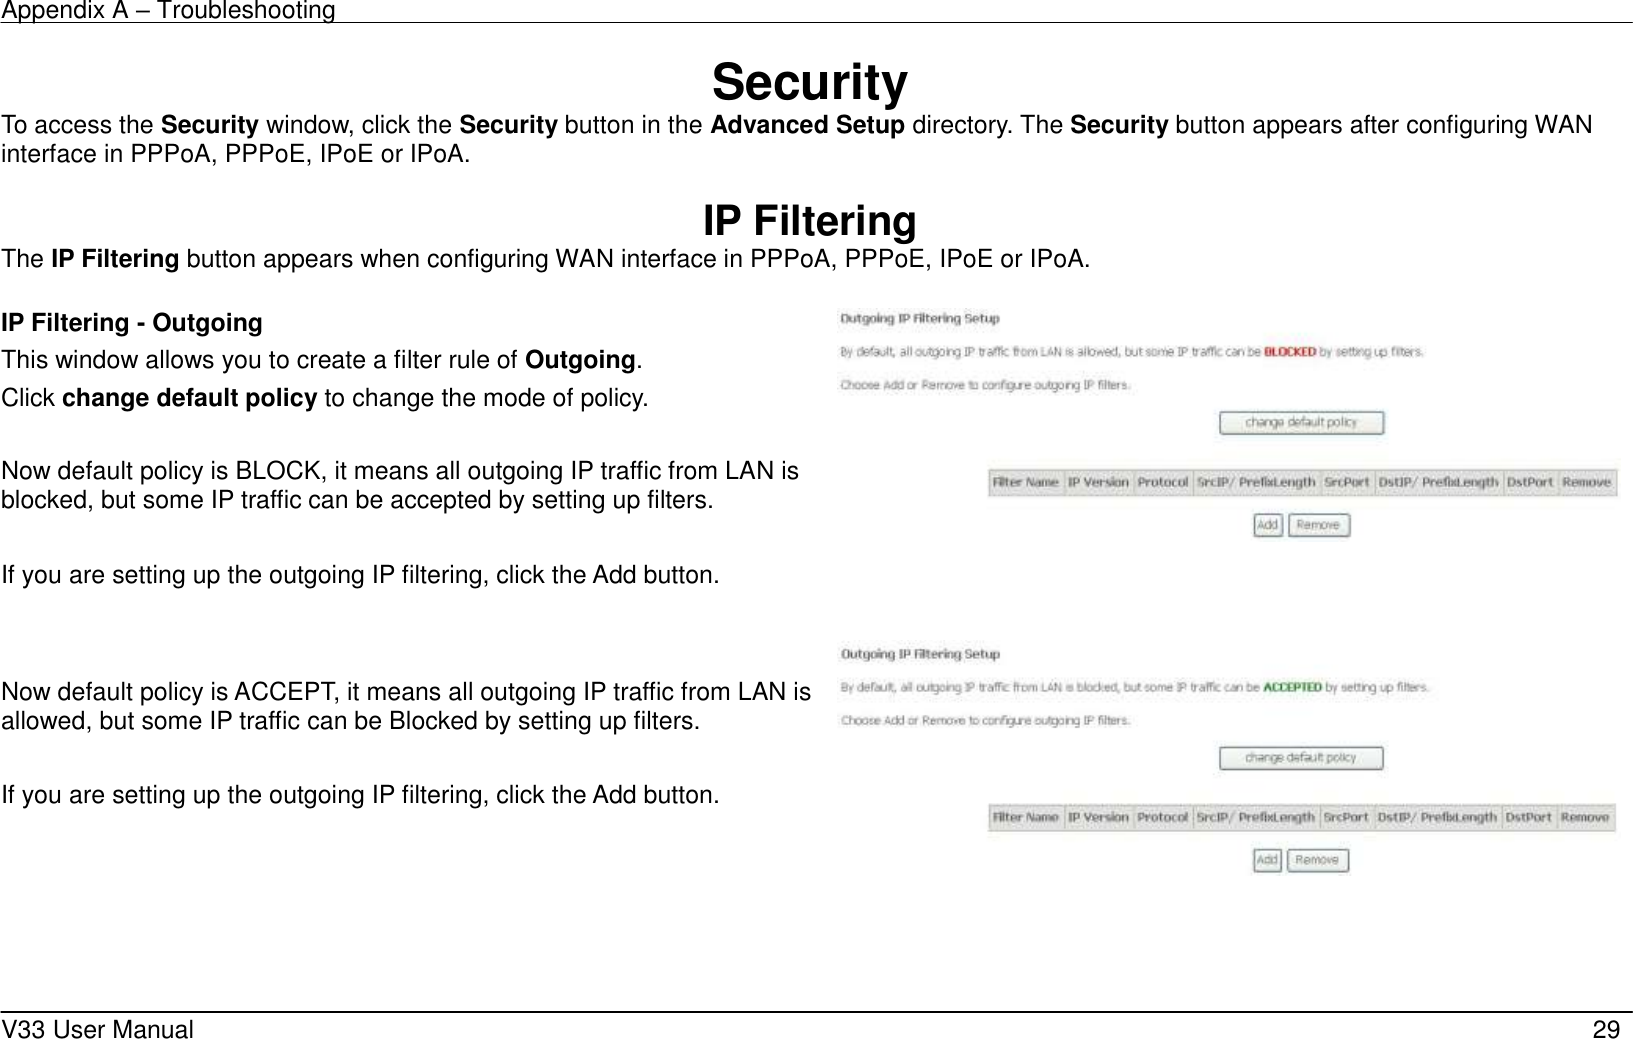 Appendix A – Troubleshooting    V33 User Manual   29 Security To access the Security window, click the Security button in the Advanced Setup directory. The Security button appears after configuring WAN interface in PPPoA, PPPoE, IPoE or IPoA.  IP Filtering The IP Filtering button appears when configuring WAN interface in PPPoA, PPPoE, IPoE or IPoA.  IP Filtering - Outgoing This window allows you to create a filter rule of Outgoing. Click change default policy to change the mode of policy.  Now default policy is BLOCK, it means all outgoing IP traffic from LAN is blocked, but some IP traffic can be accepted by setting up filters.  If you are setting up the outgoing IP filtering, click the Add button.       Now default policy is ACCEPT, it means all outgoing IP traffic from LAN is allowed, but some IP traffic can be Blocked by setting up filters.  If you are setting up the outgoing IP filtering, click the Add button.  